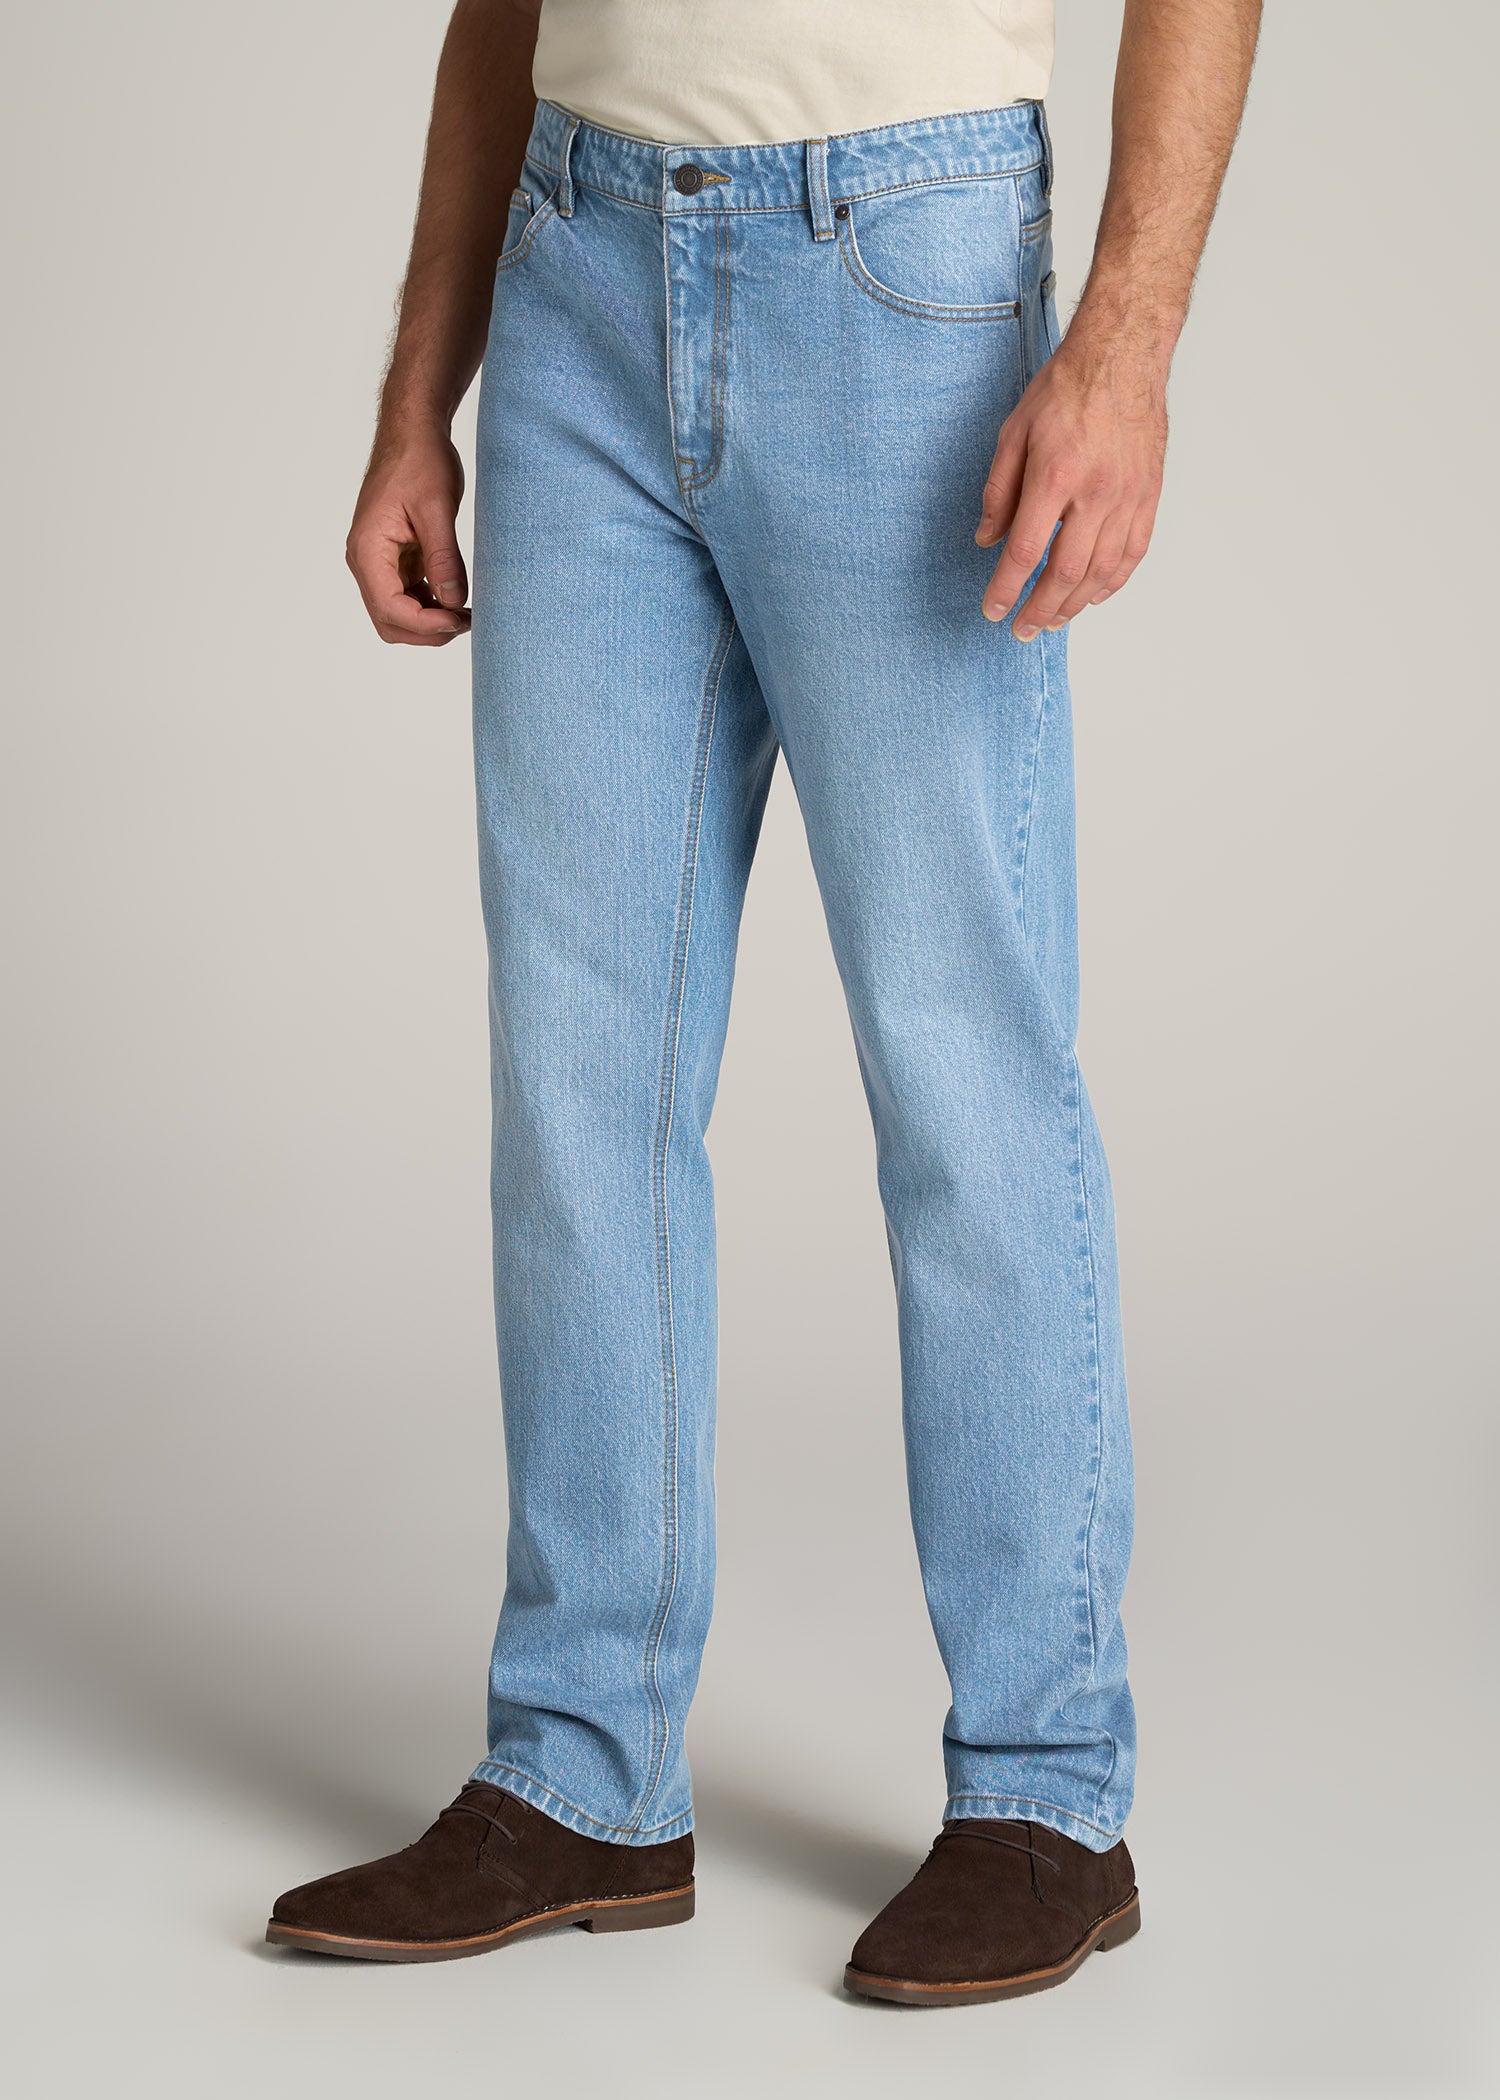 Tom “ Relaxed Bootcut | MENS CINCH GRANT MEDIUM STONE WASH JEANS MB5 –  Botas Rojero